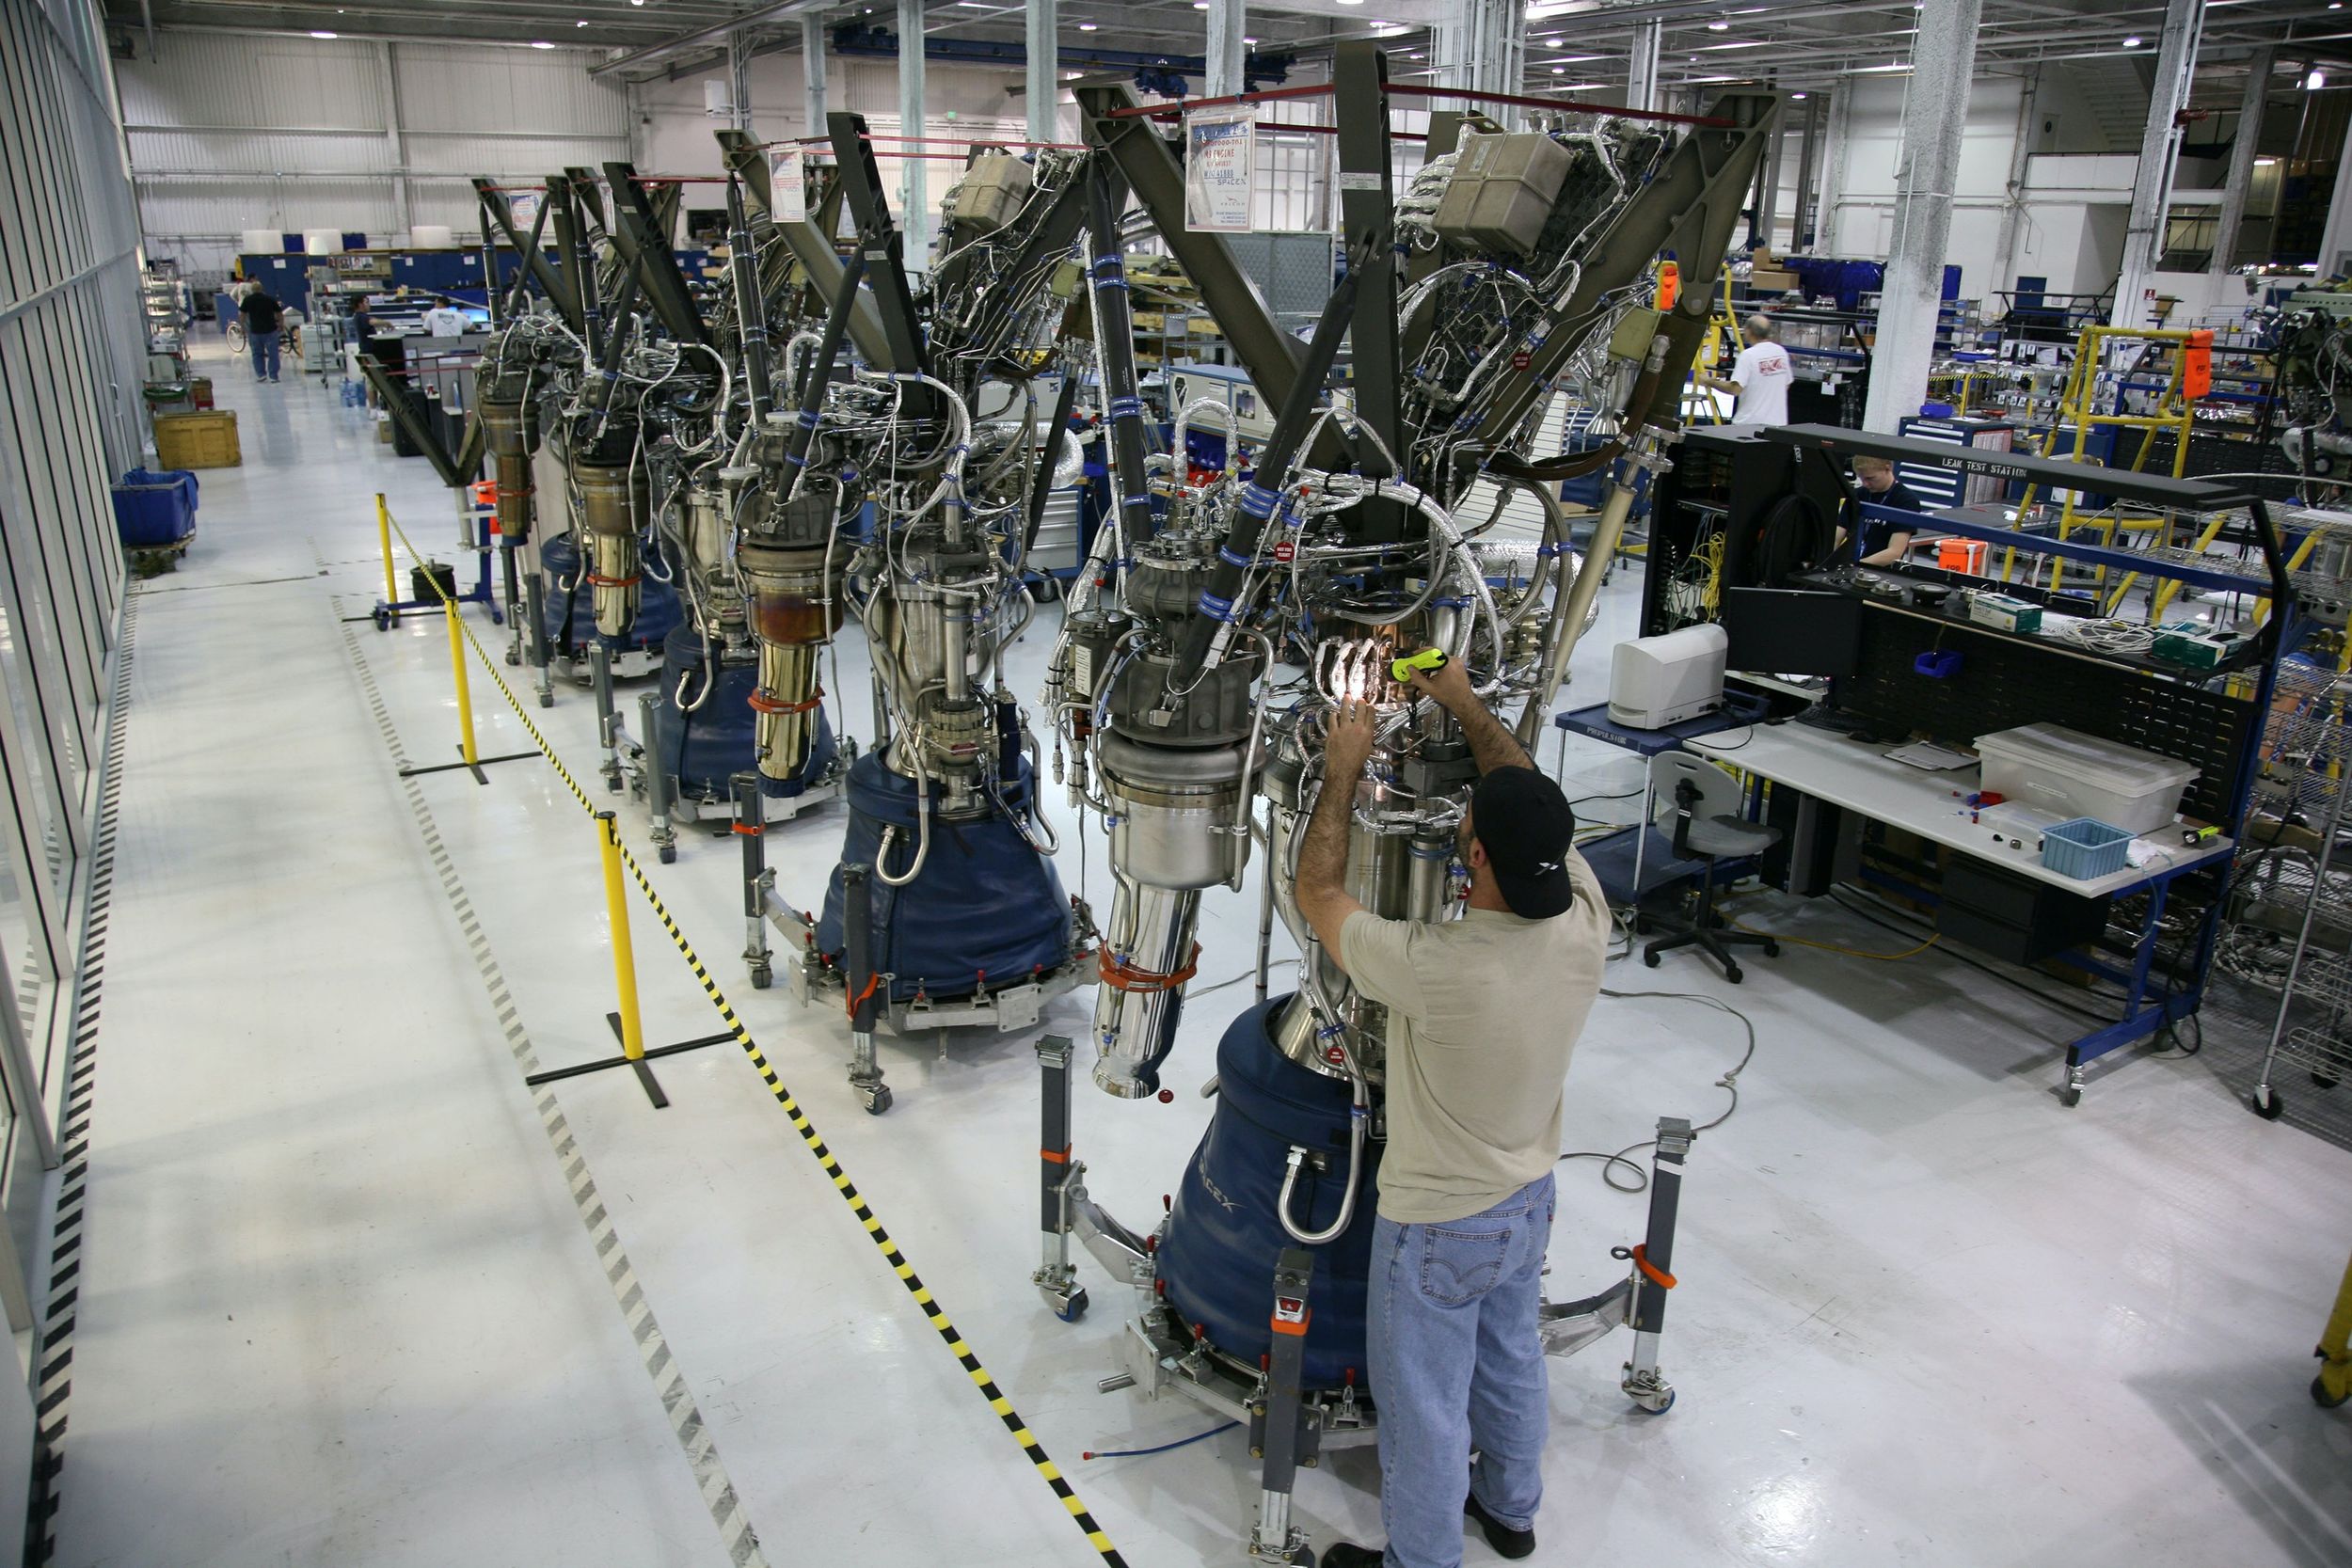 Interior of an aerospace manufacturing facility.